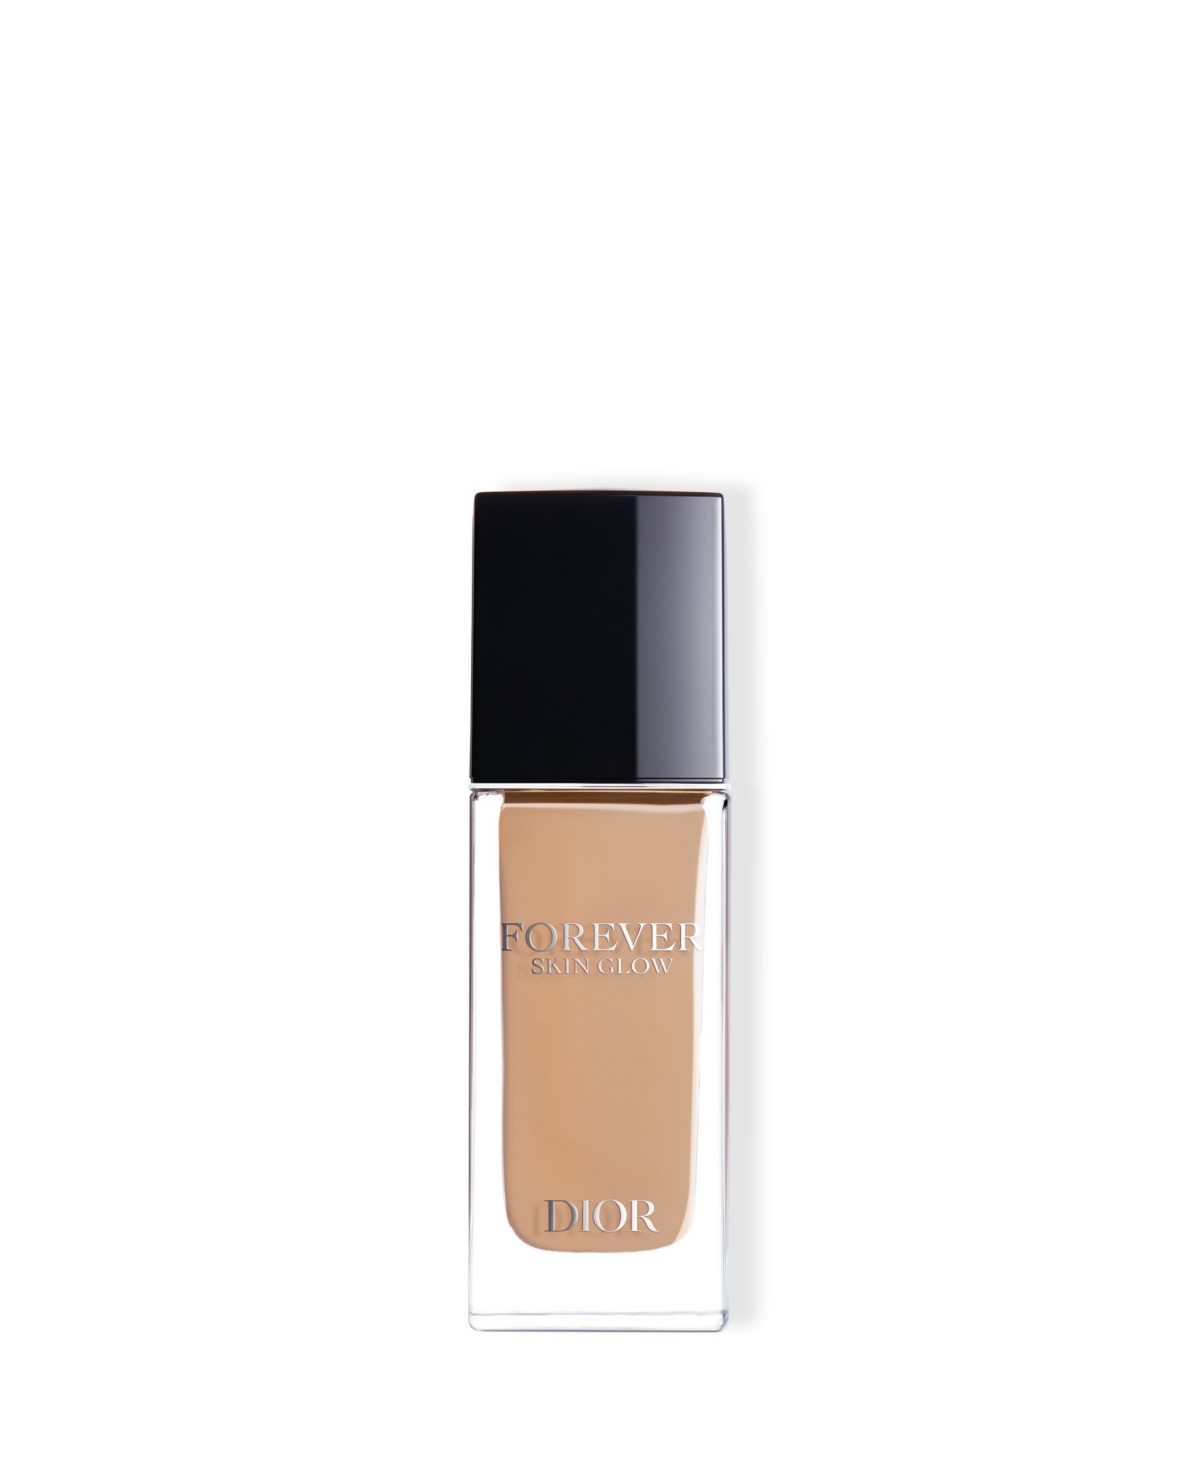 Dior Forever Skin Glow Hydrating Foundation Spf 15 In Cool (medium Skin With Cool Undertones)